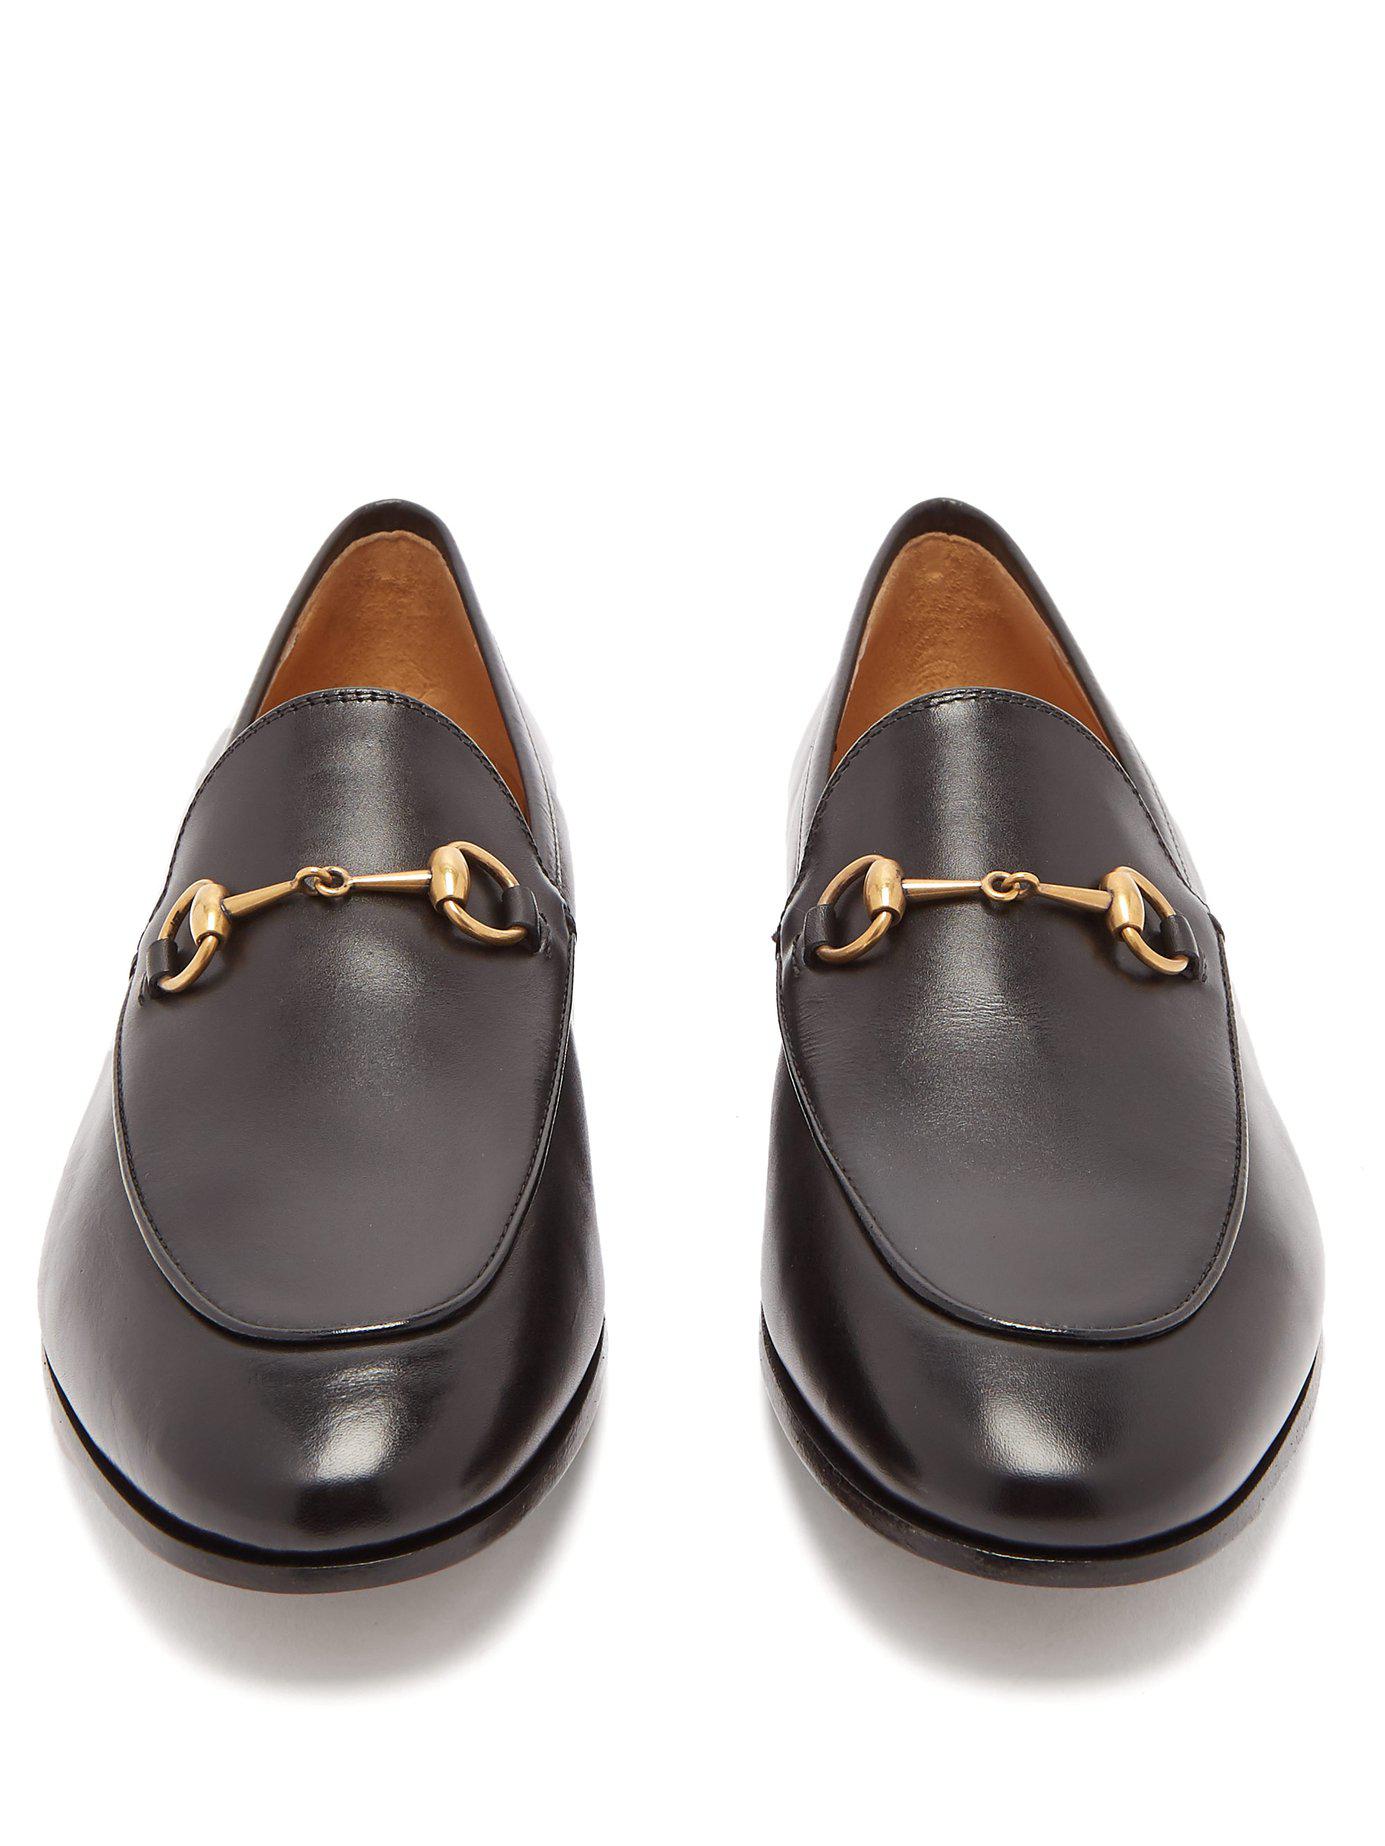 Gucci Jordaan Leather Loafers in Black - Lyst